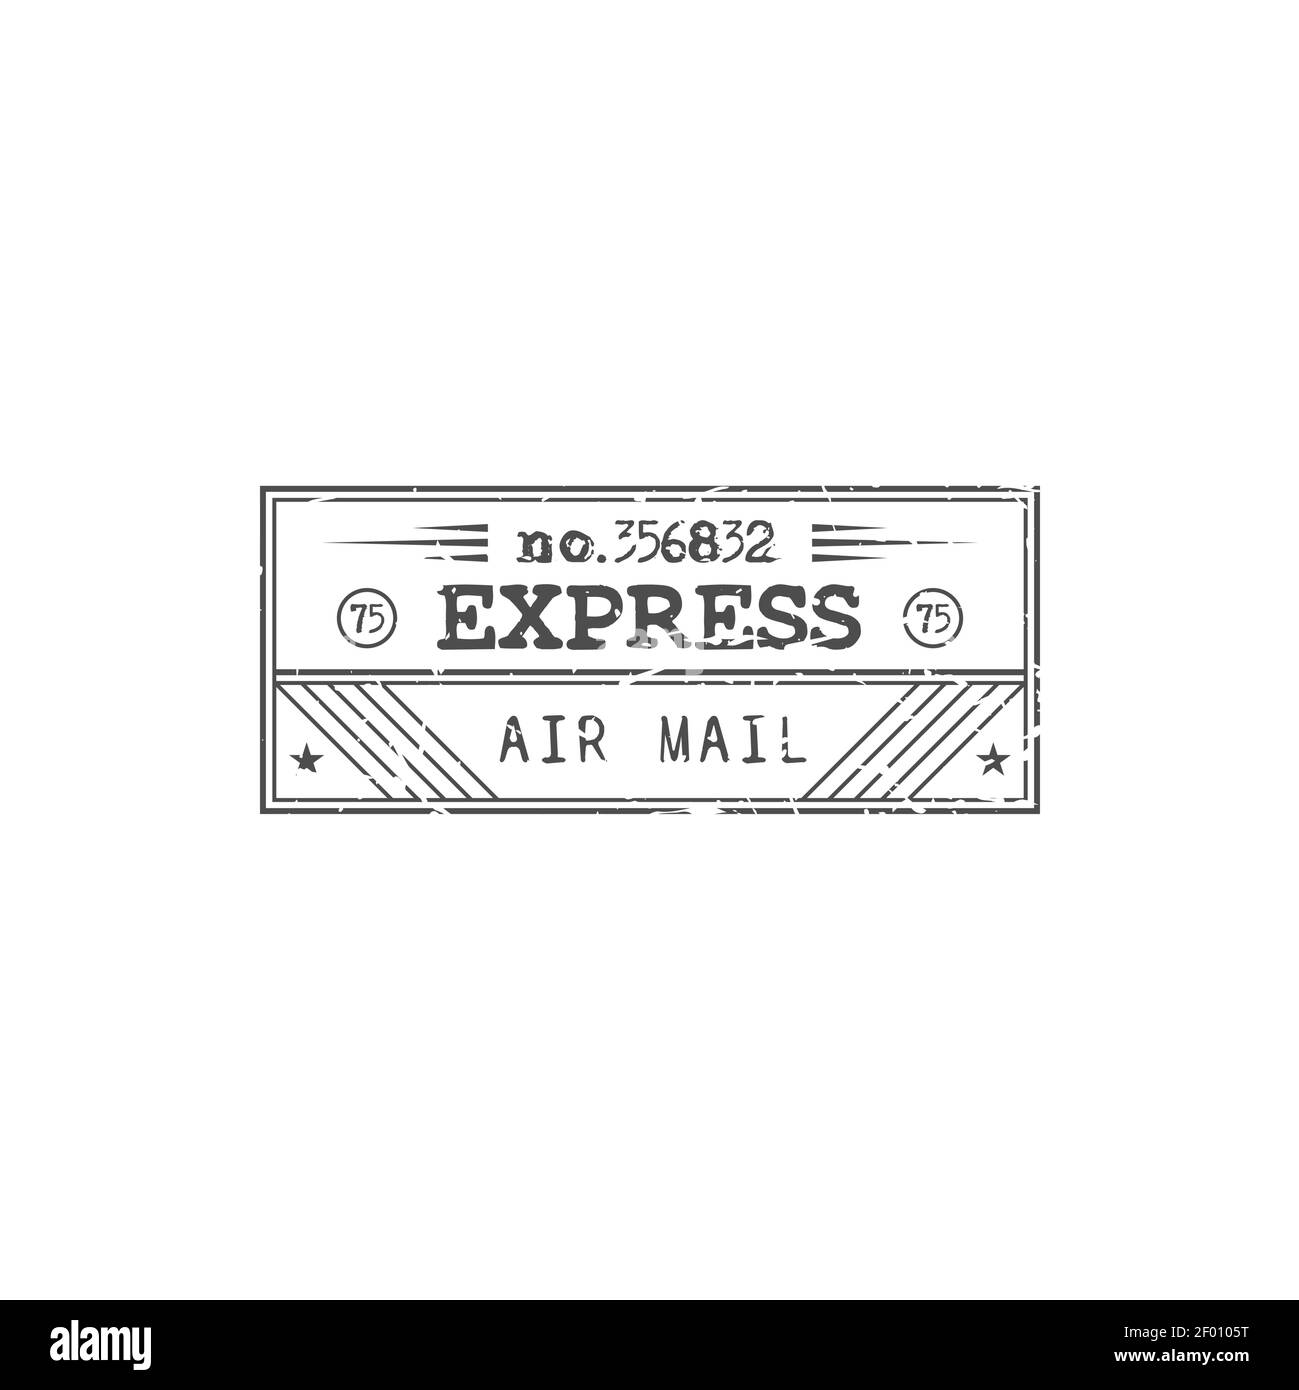 Express airmail priority stamp isolated grange post icon. Vector express mail symbol, prioritaire, air mail instructional mark on parcel. Rectangular Stock Vector